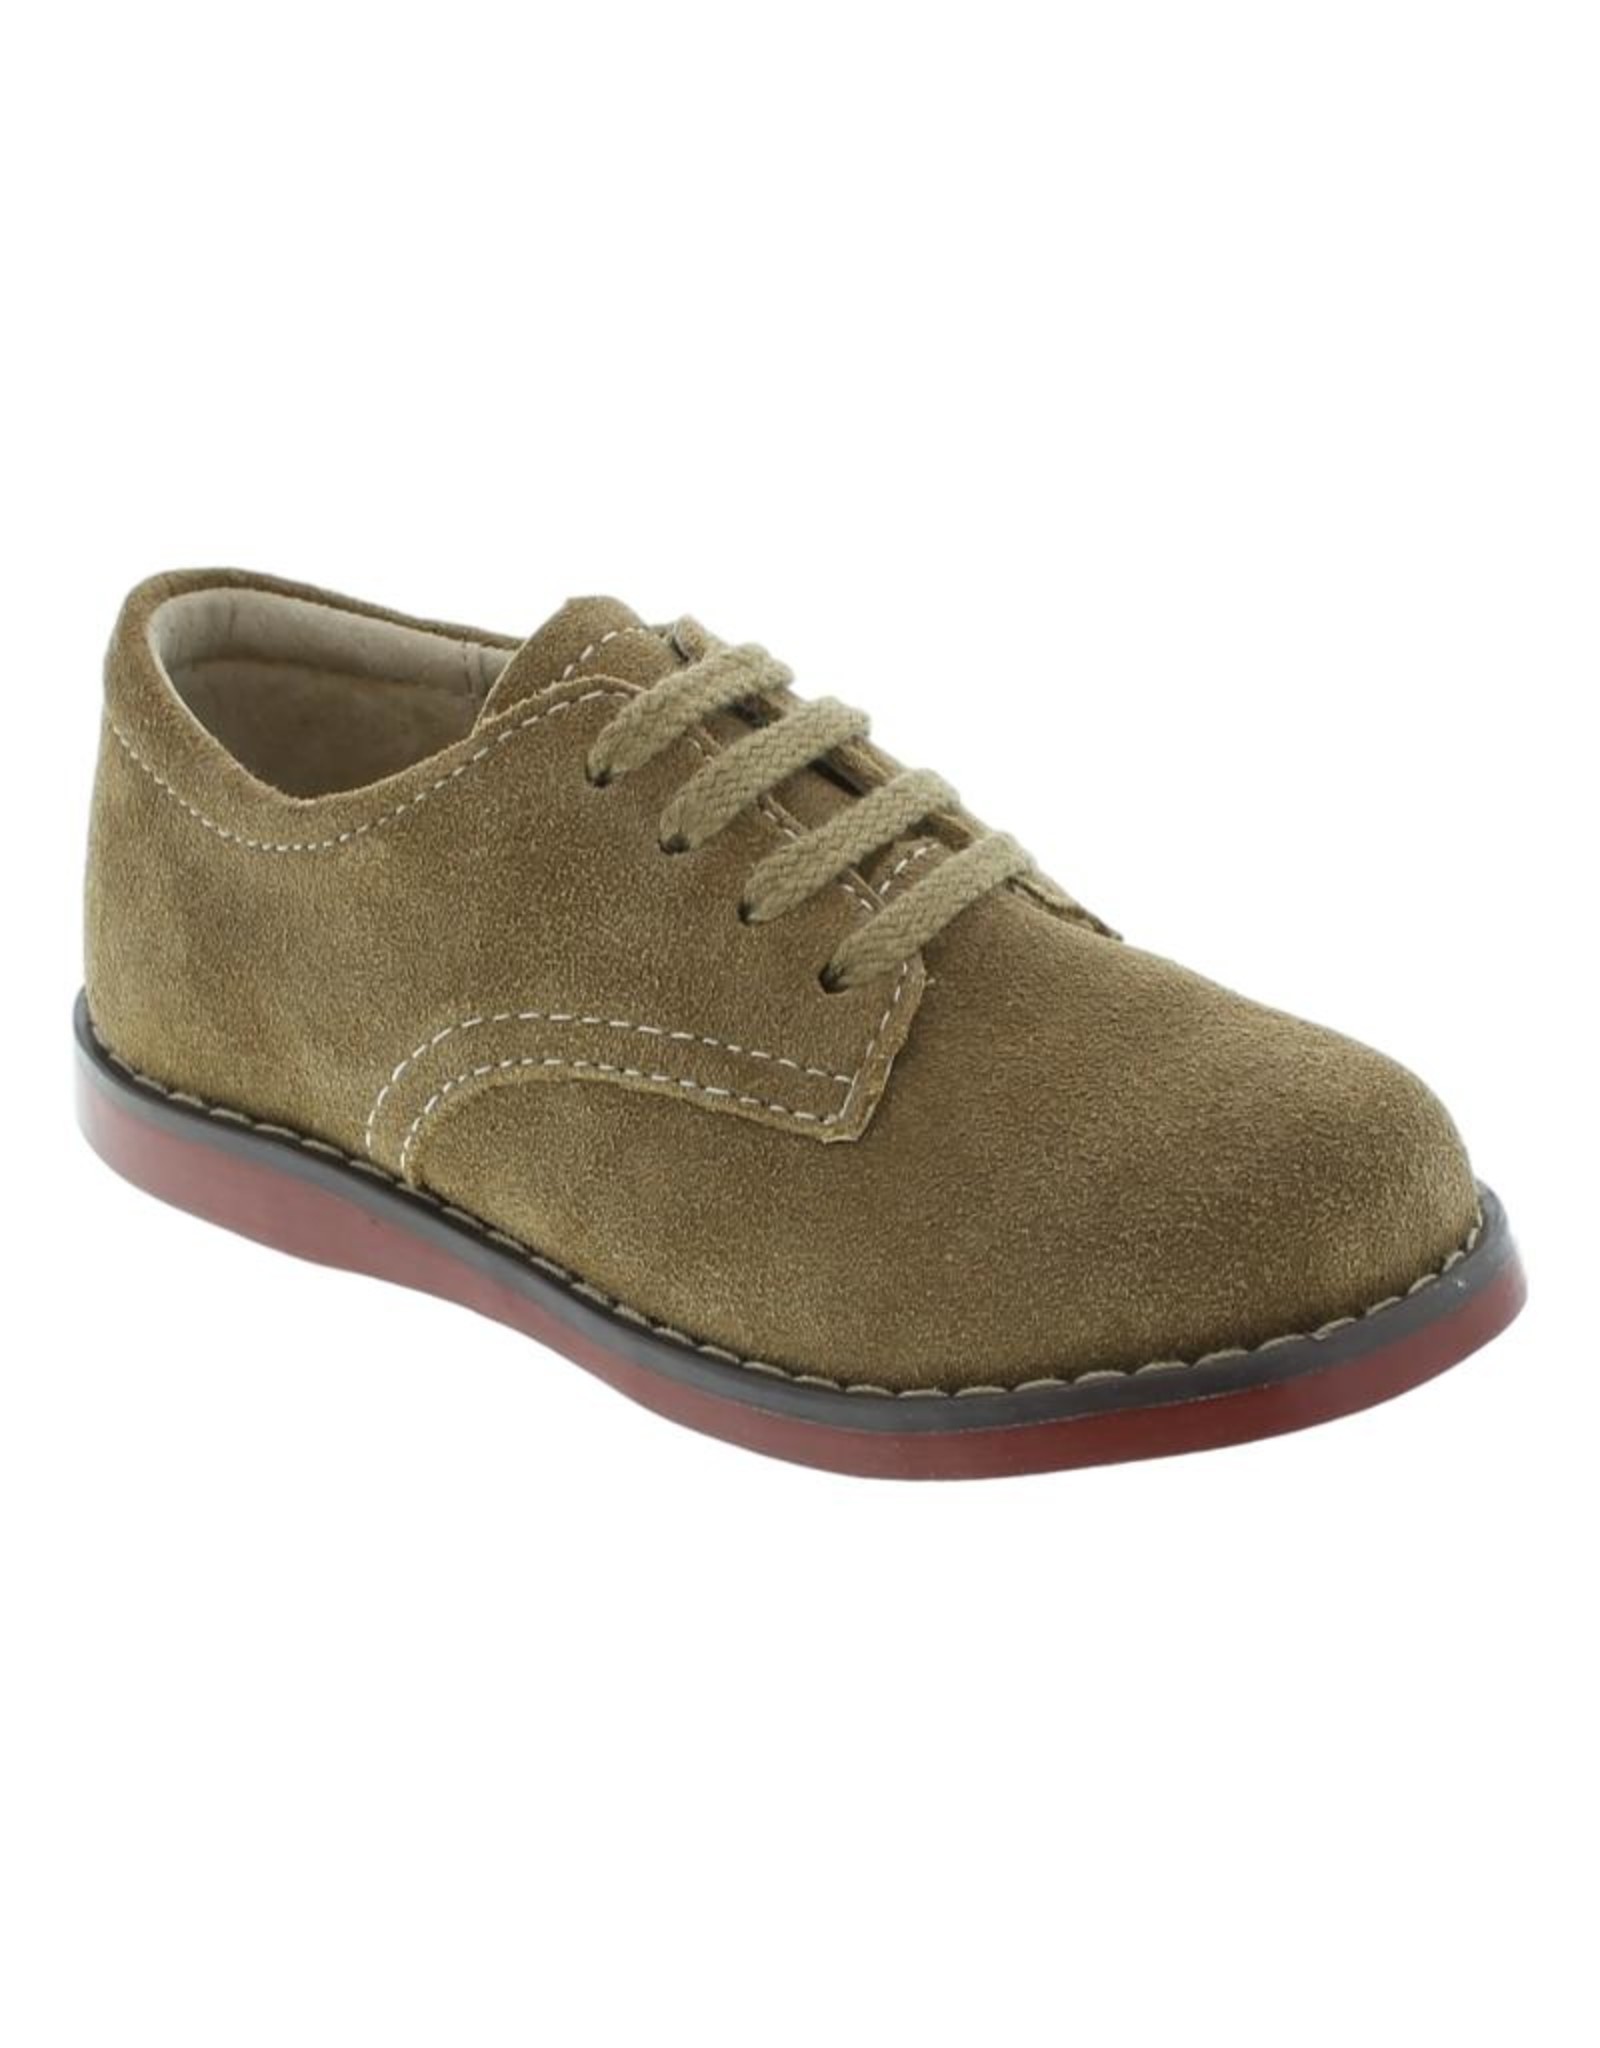 Footmates Bucky Dirty Suede